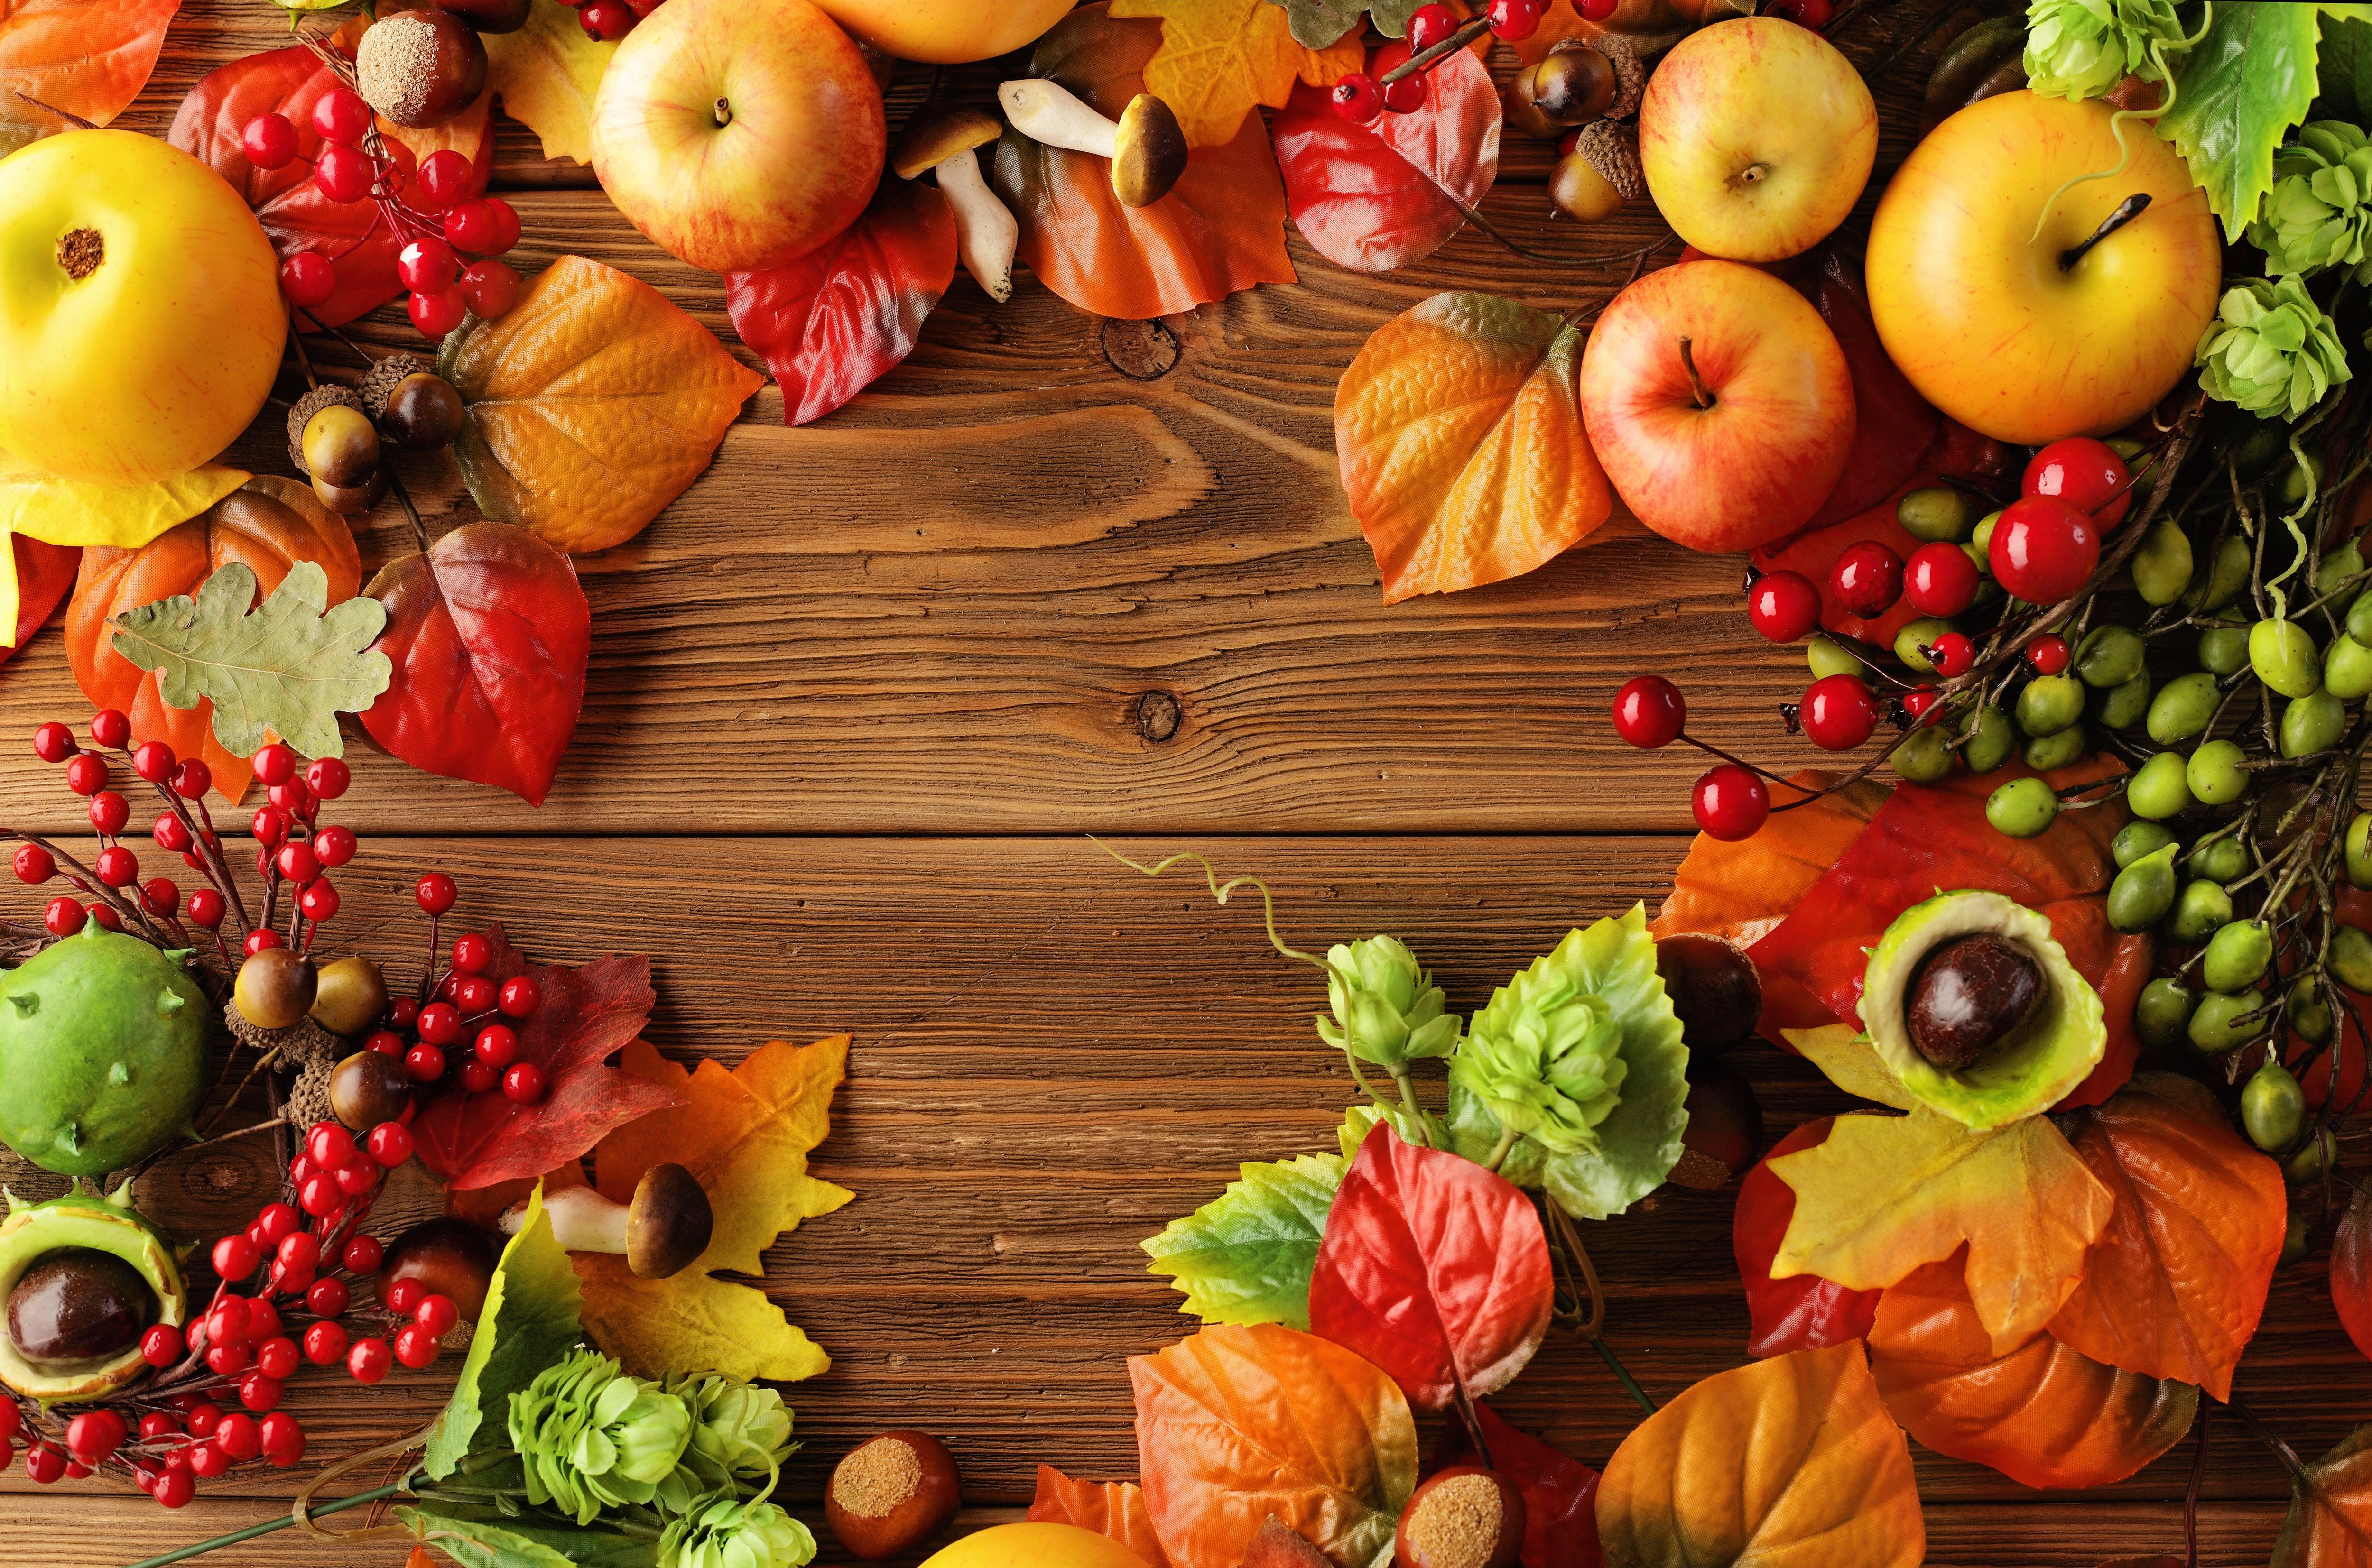 Autumn Wooden Background With Fruits Quality Image And Transparent PNG Free Clipart